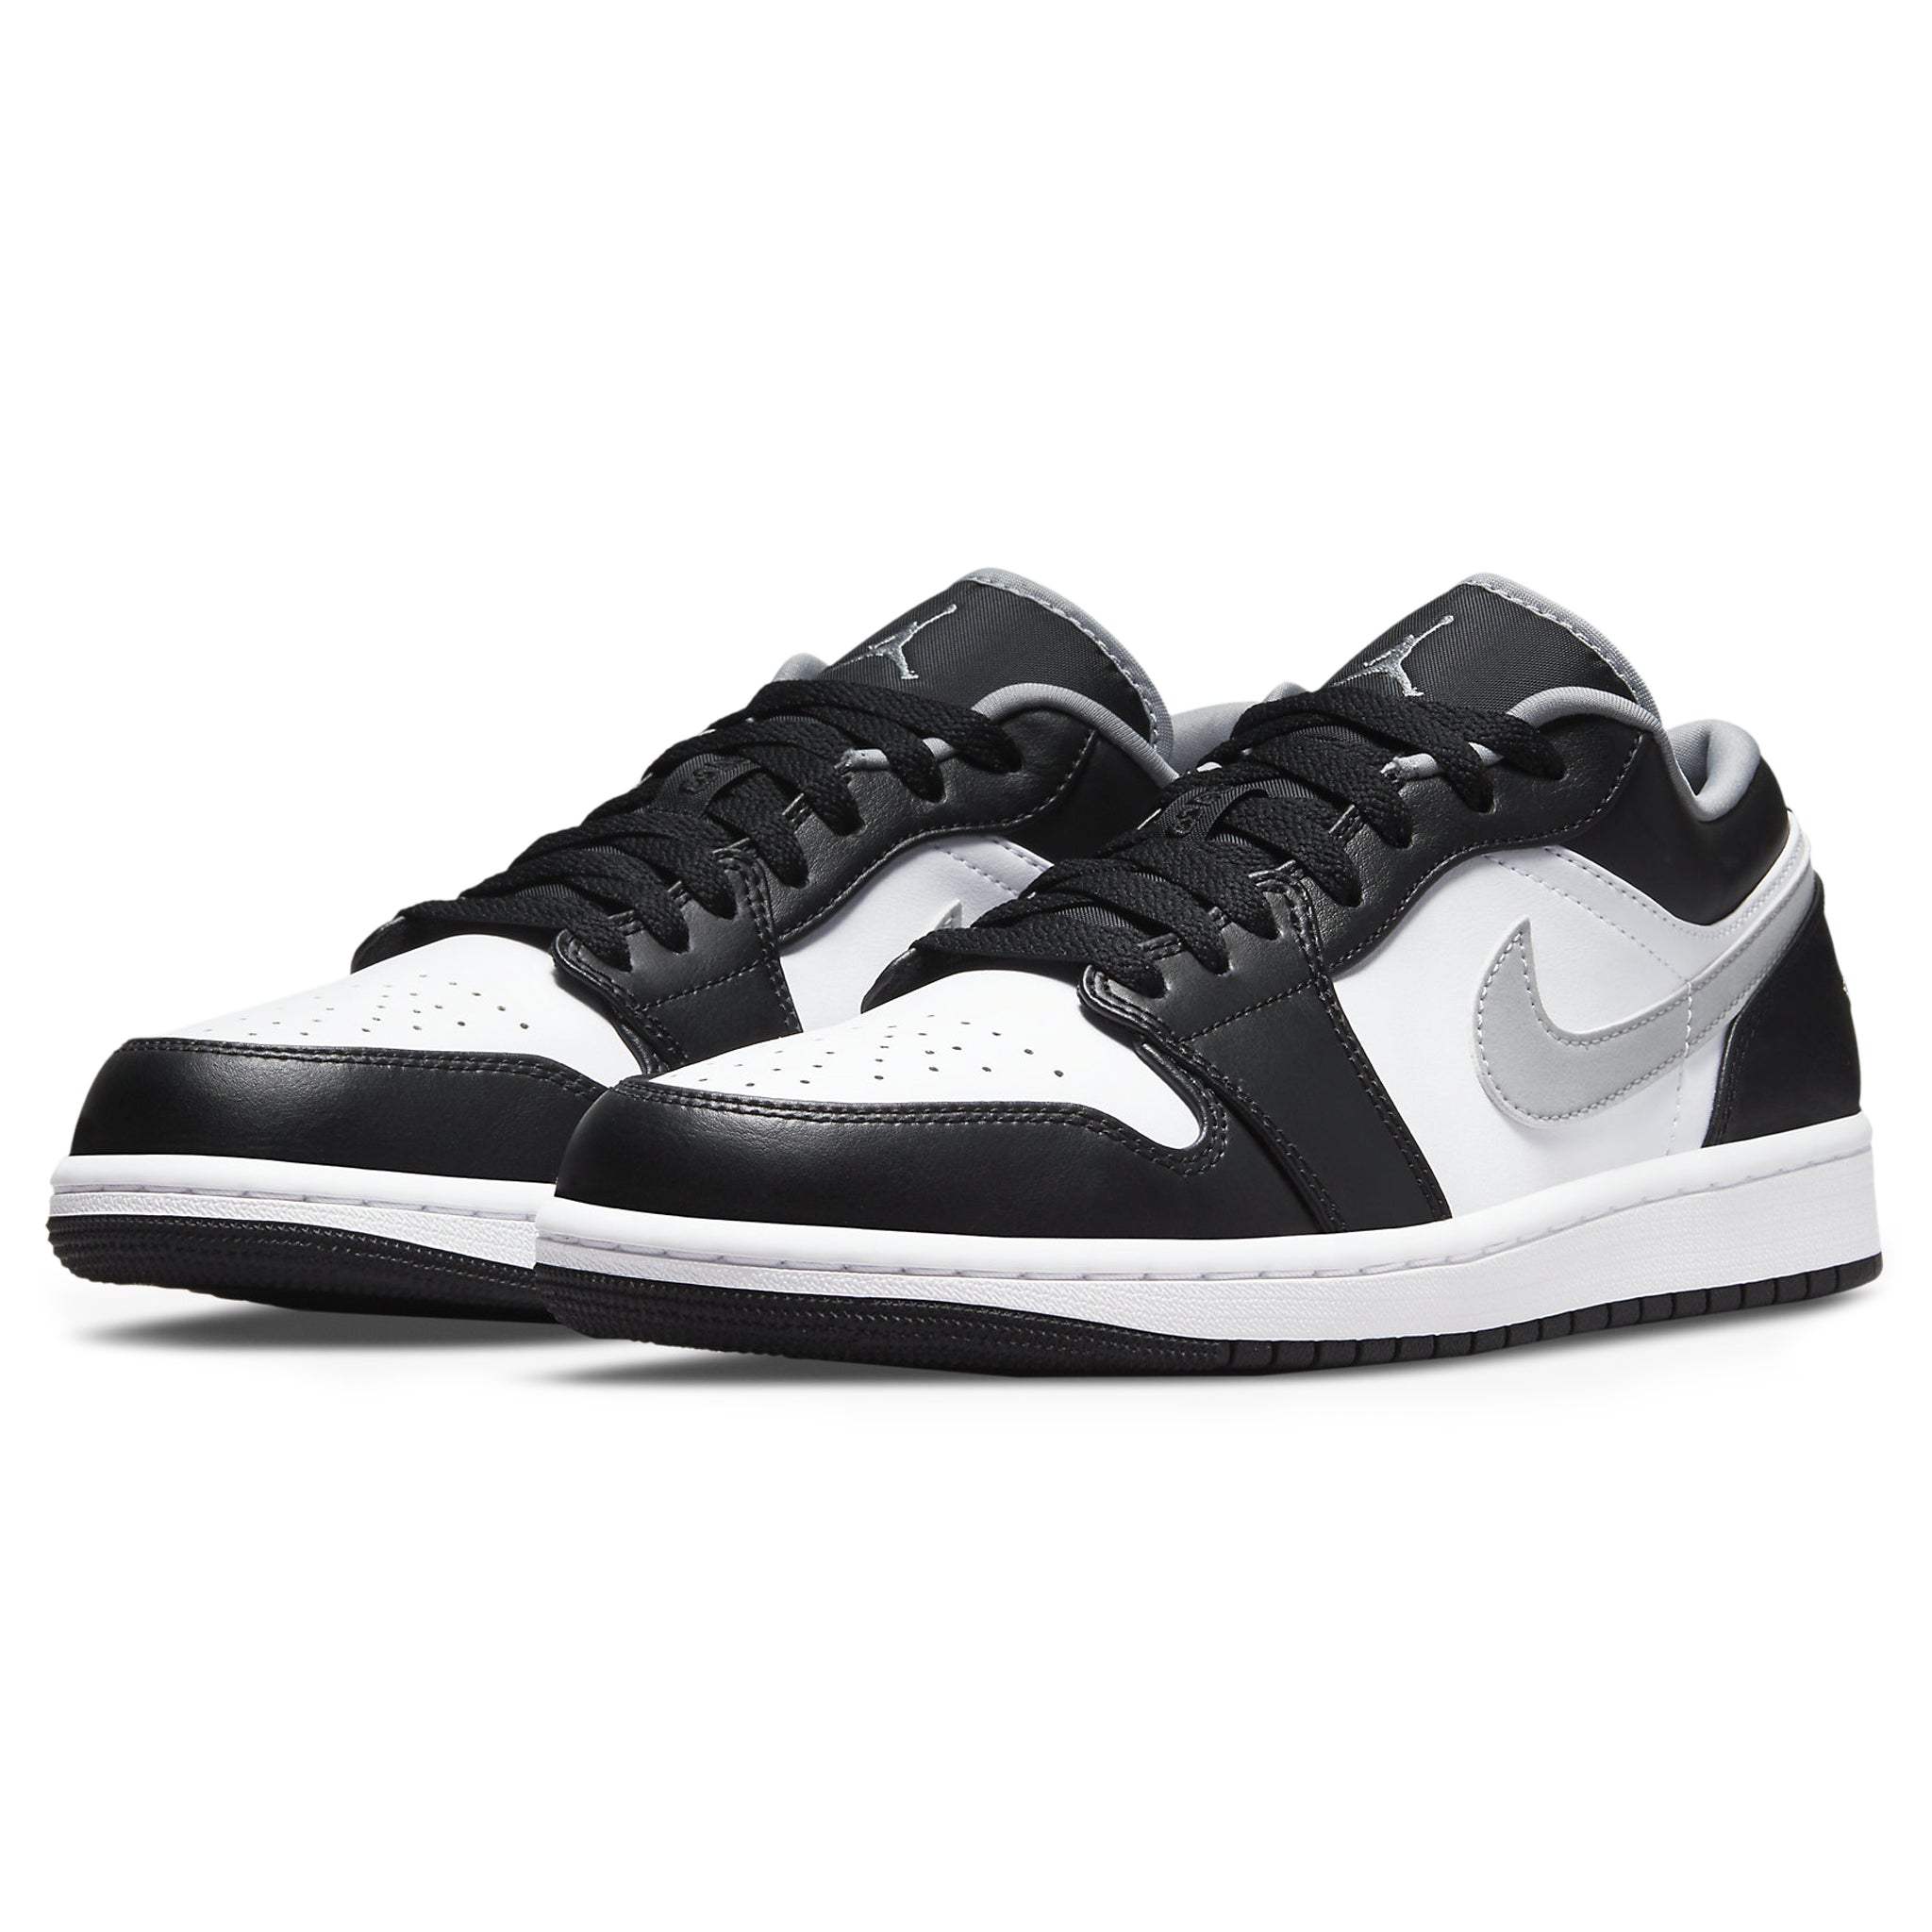 Front side view of Air Jordan 1 Low Shadow 553558-040